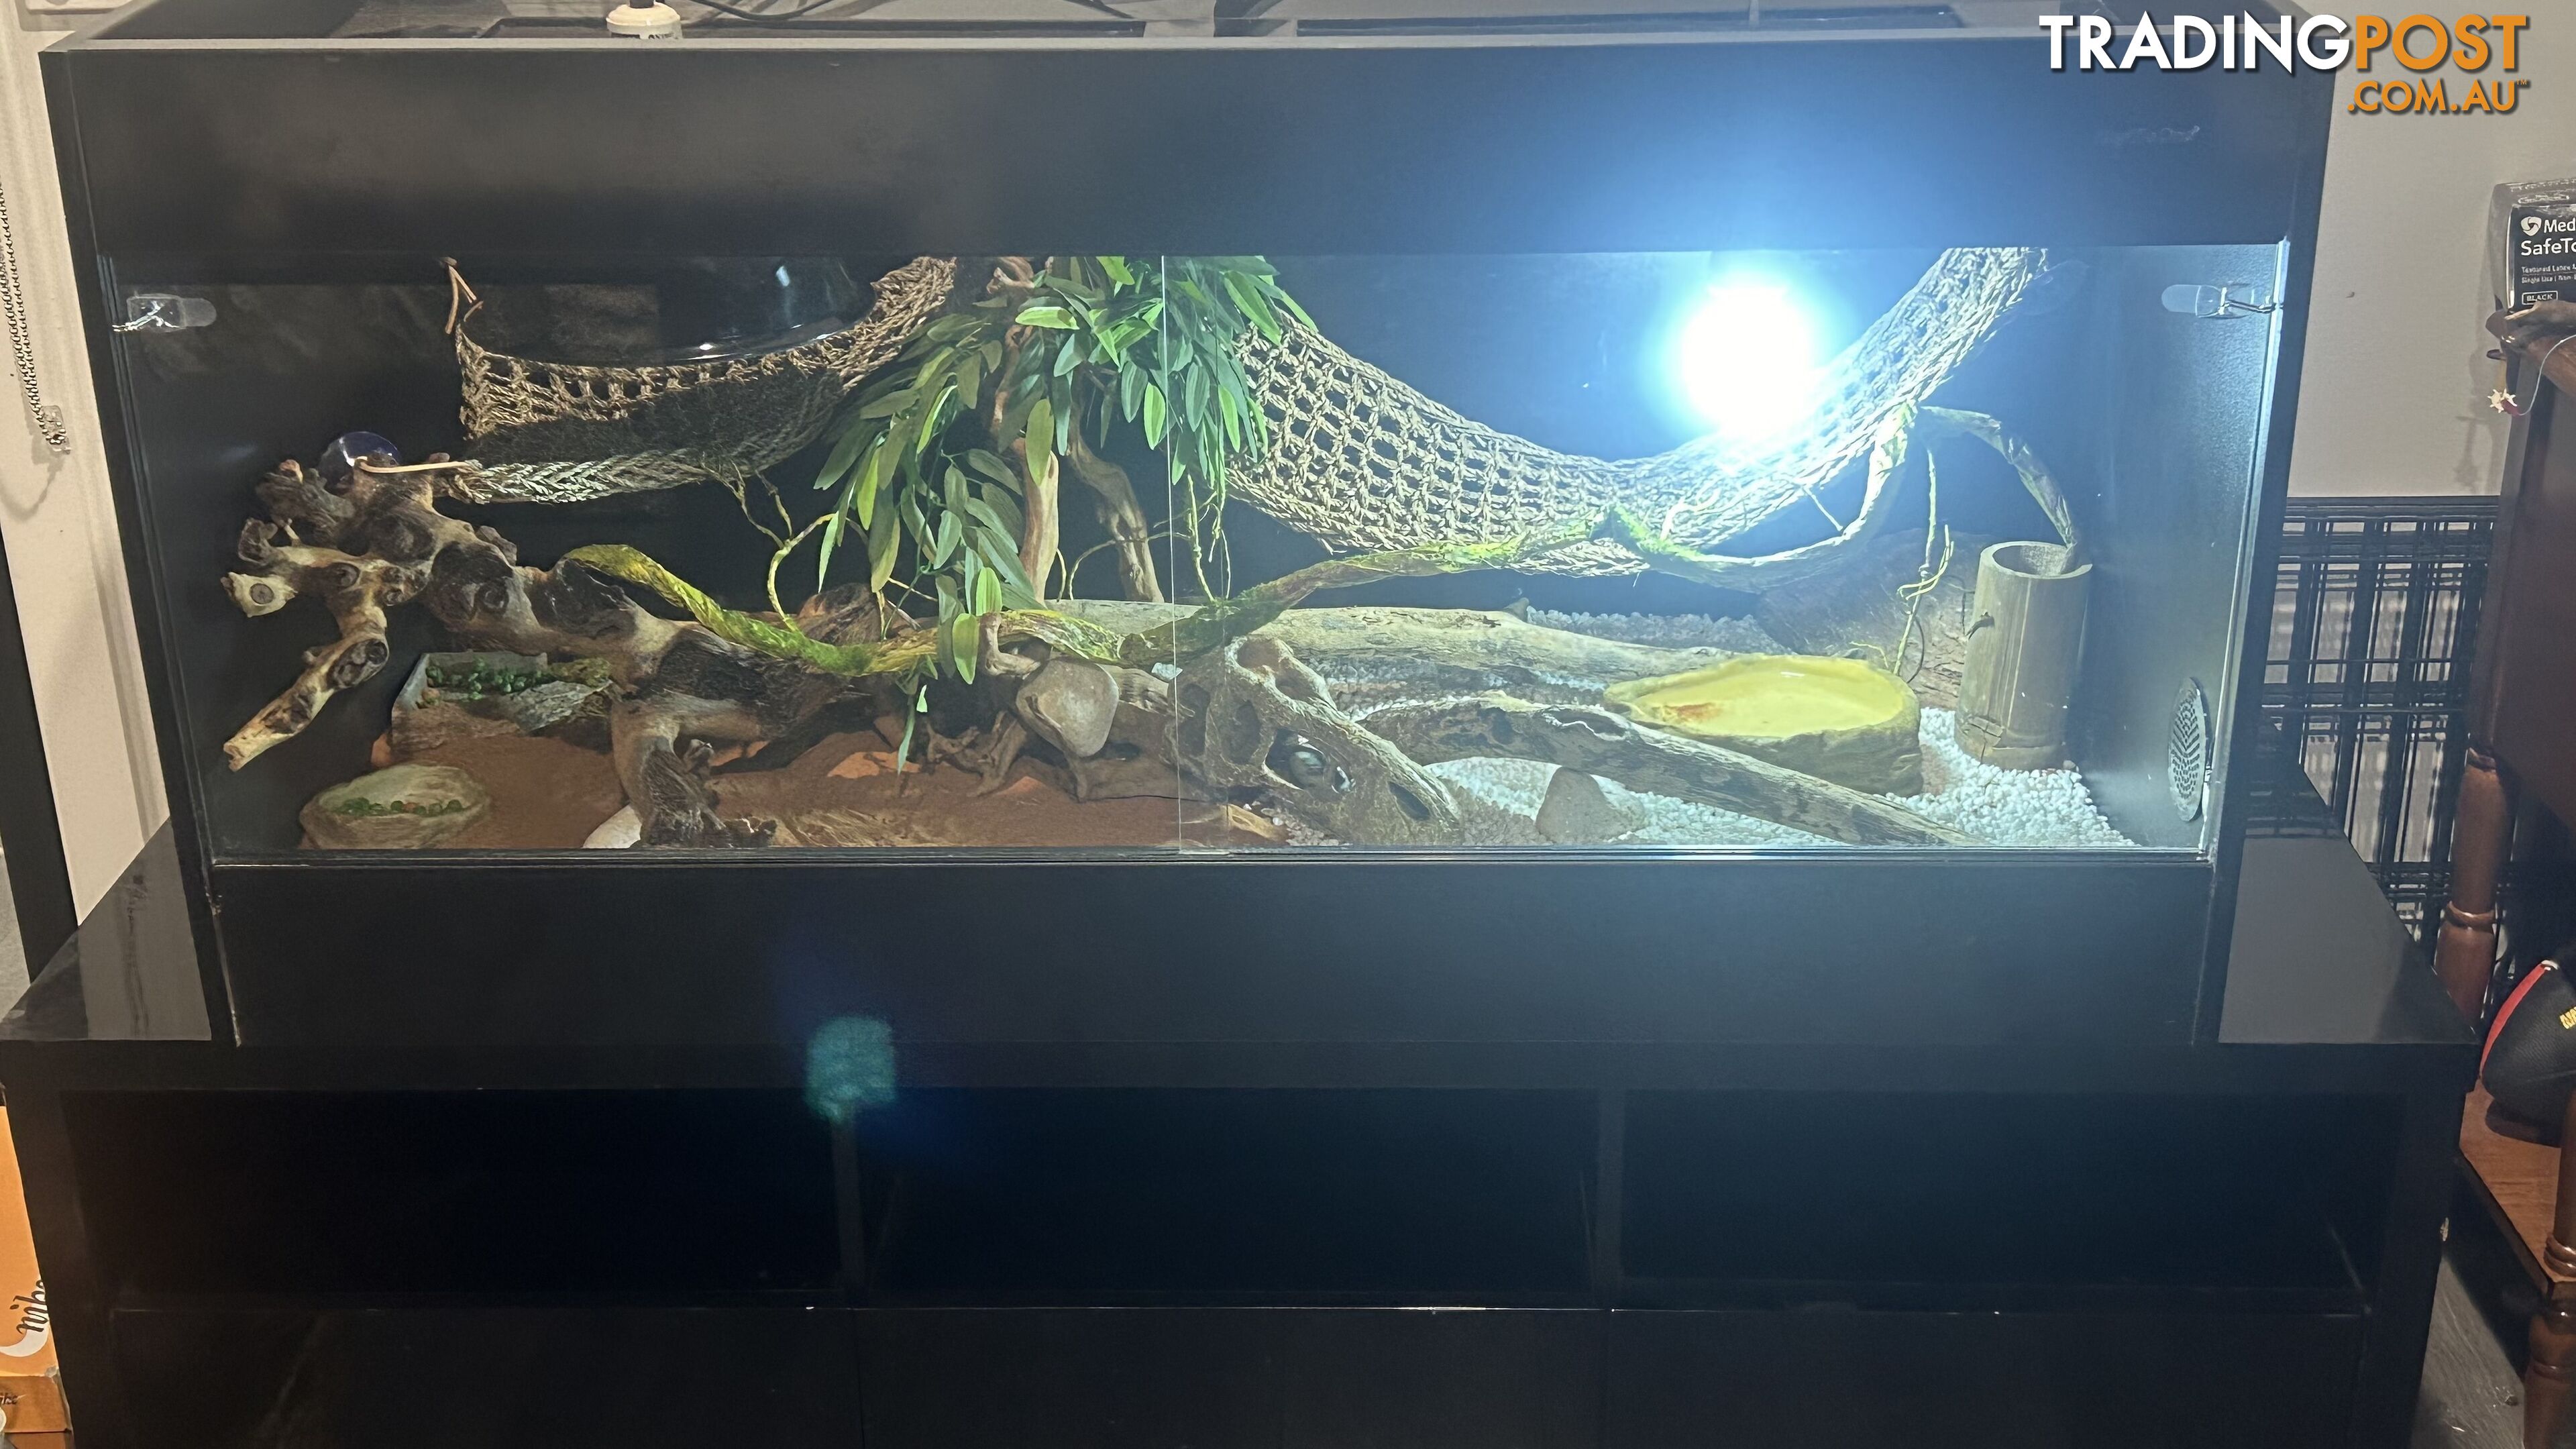 Two Central Bearded Dragons - pair with Accessories